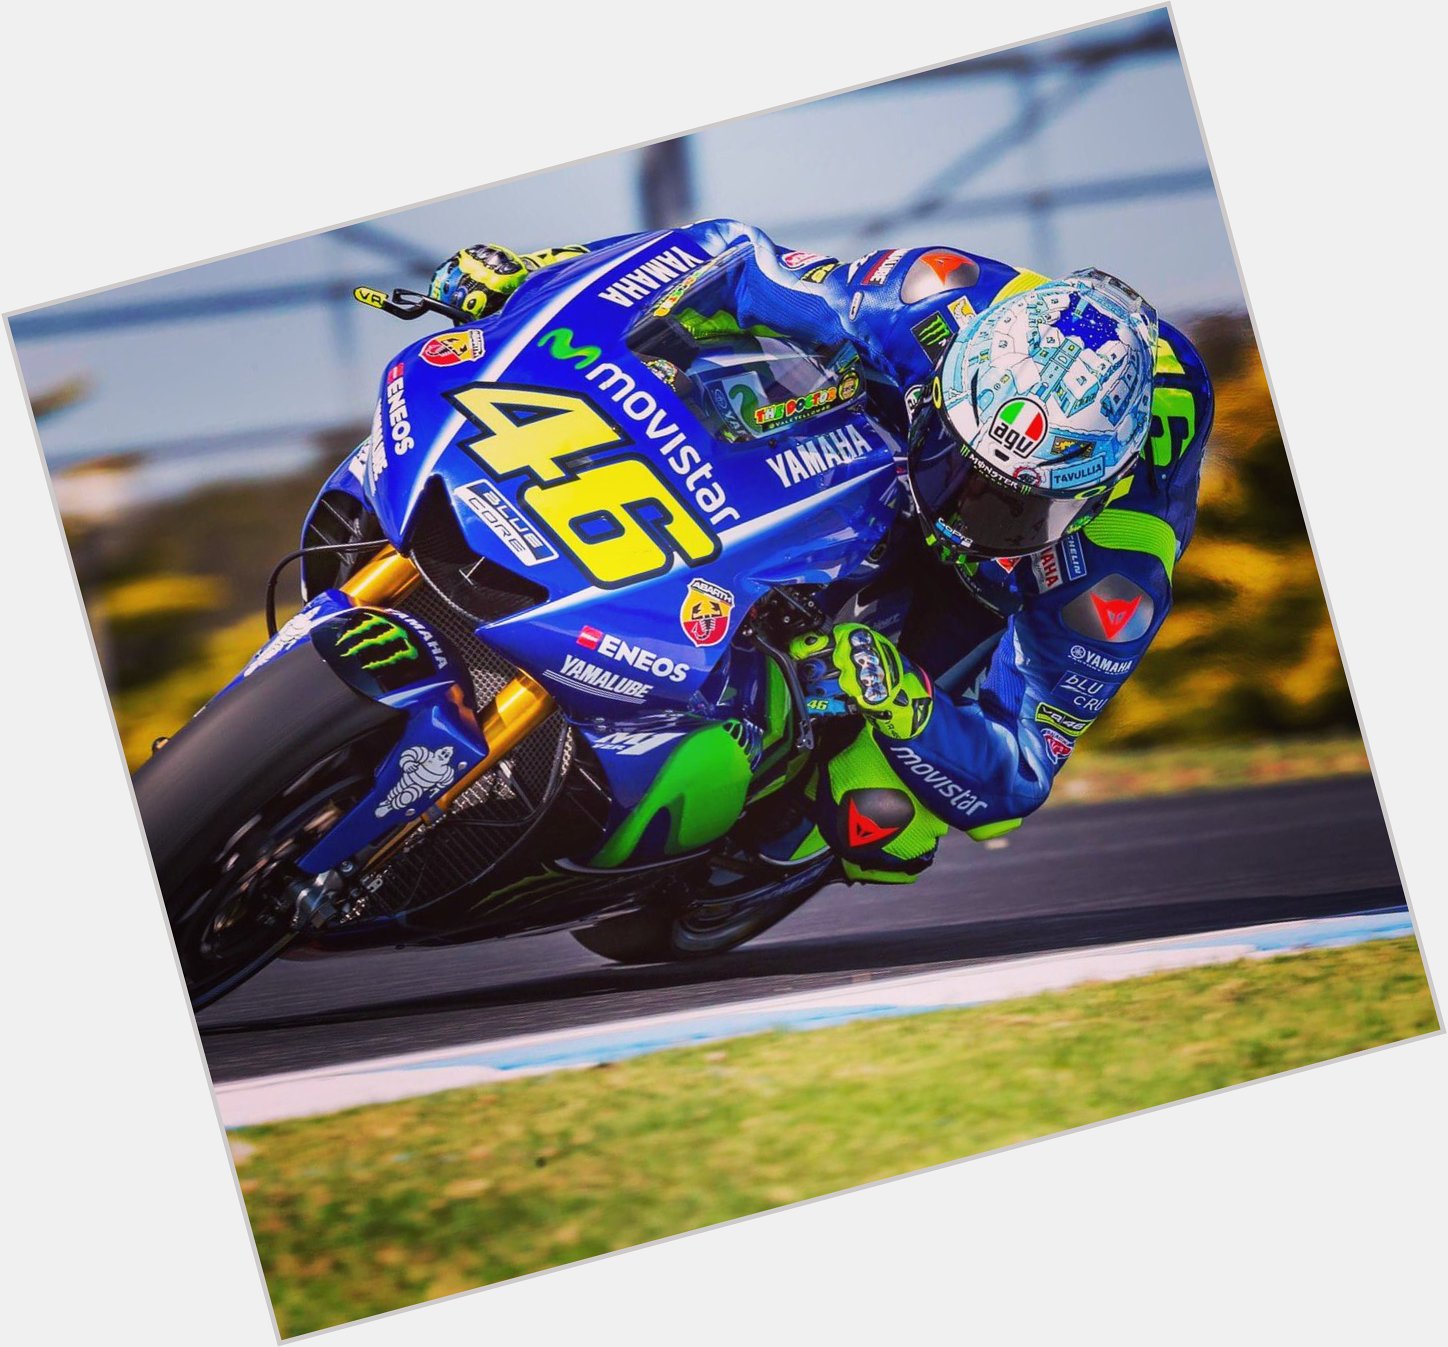 A HUUUUUGGGGEEEE happy birthday to the legend Valentino Rossi!   